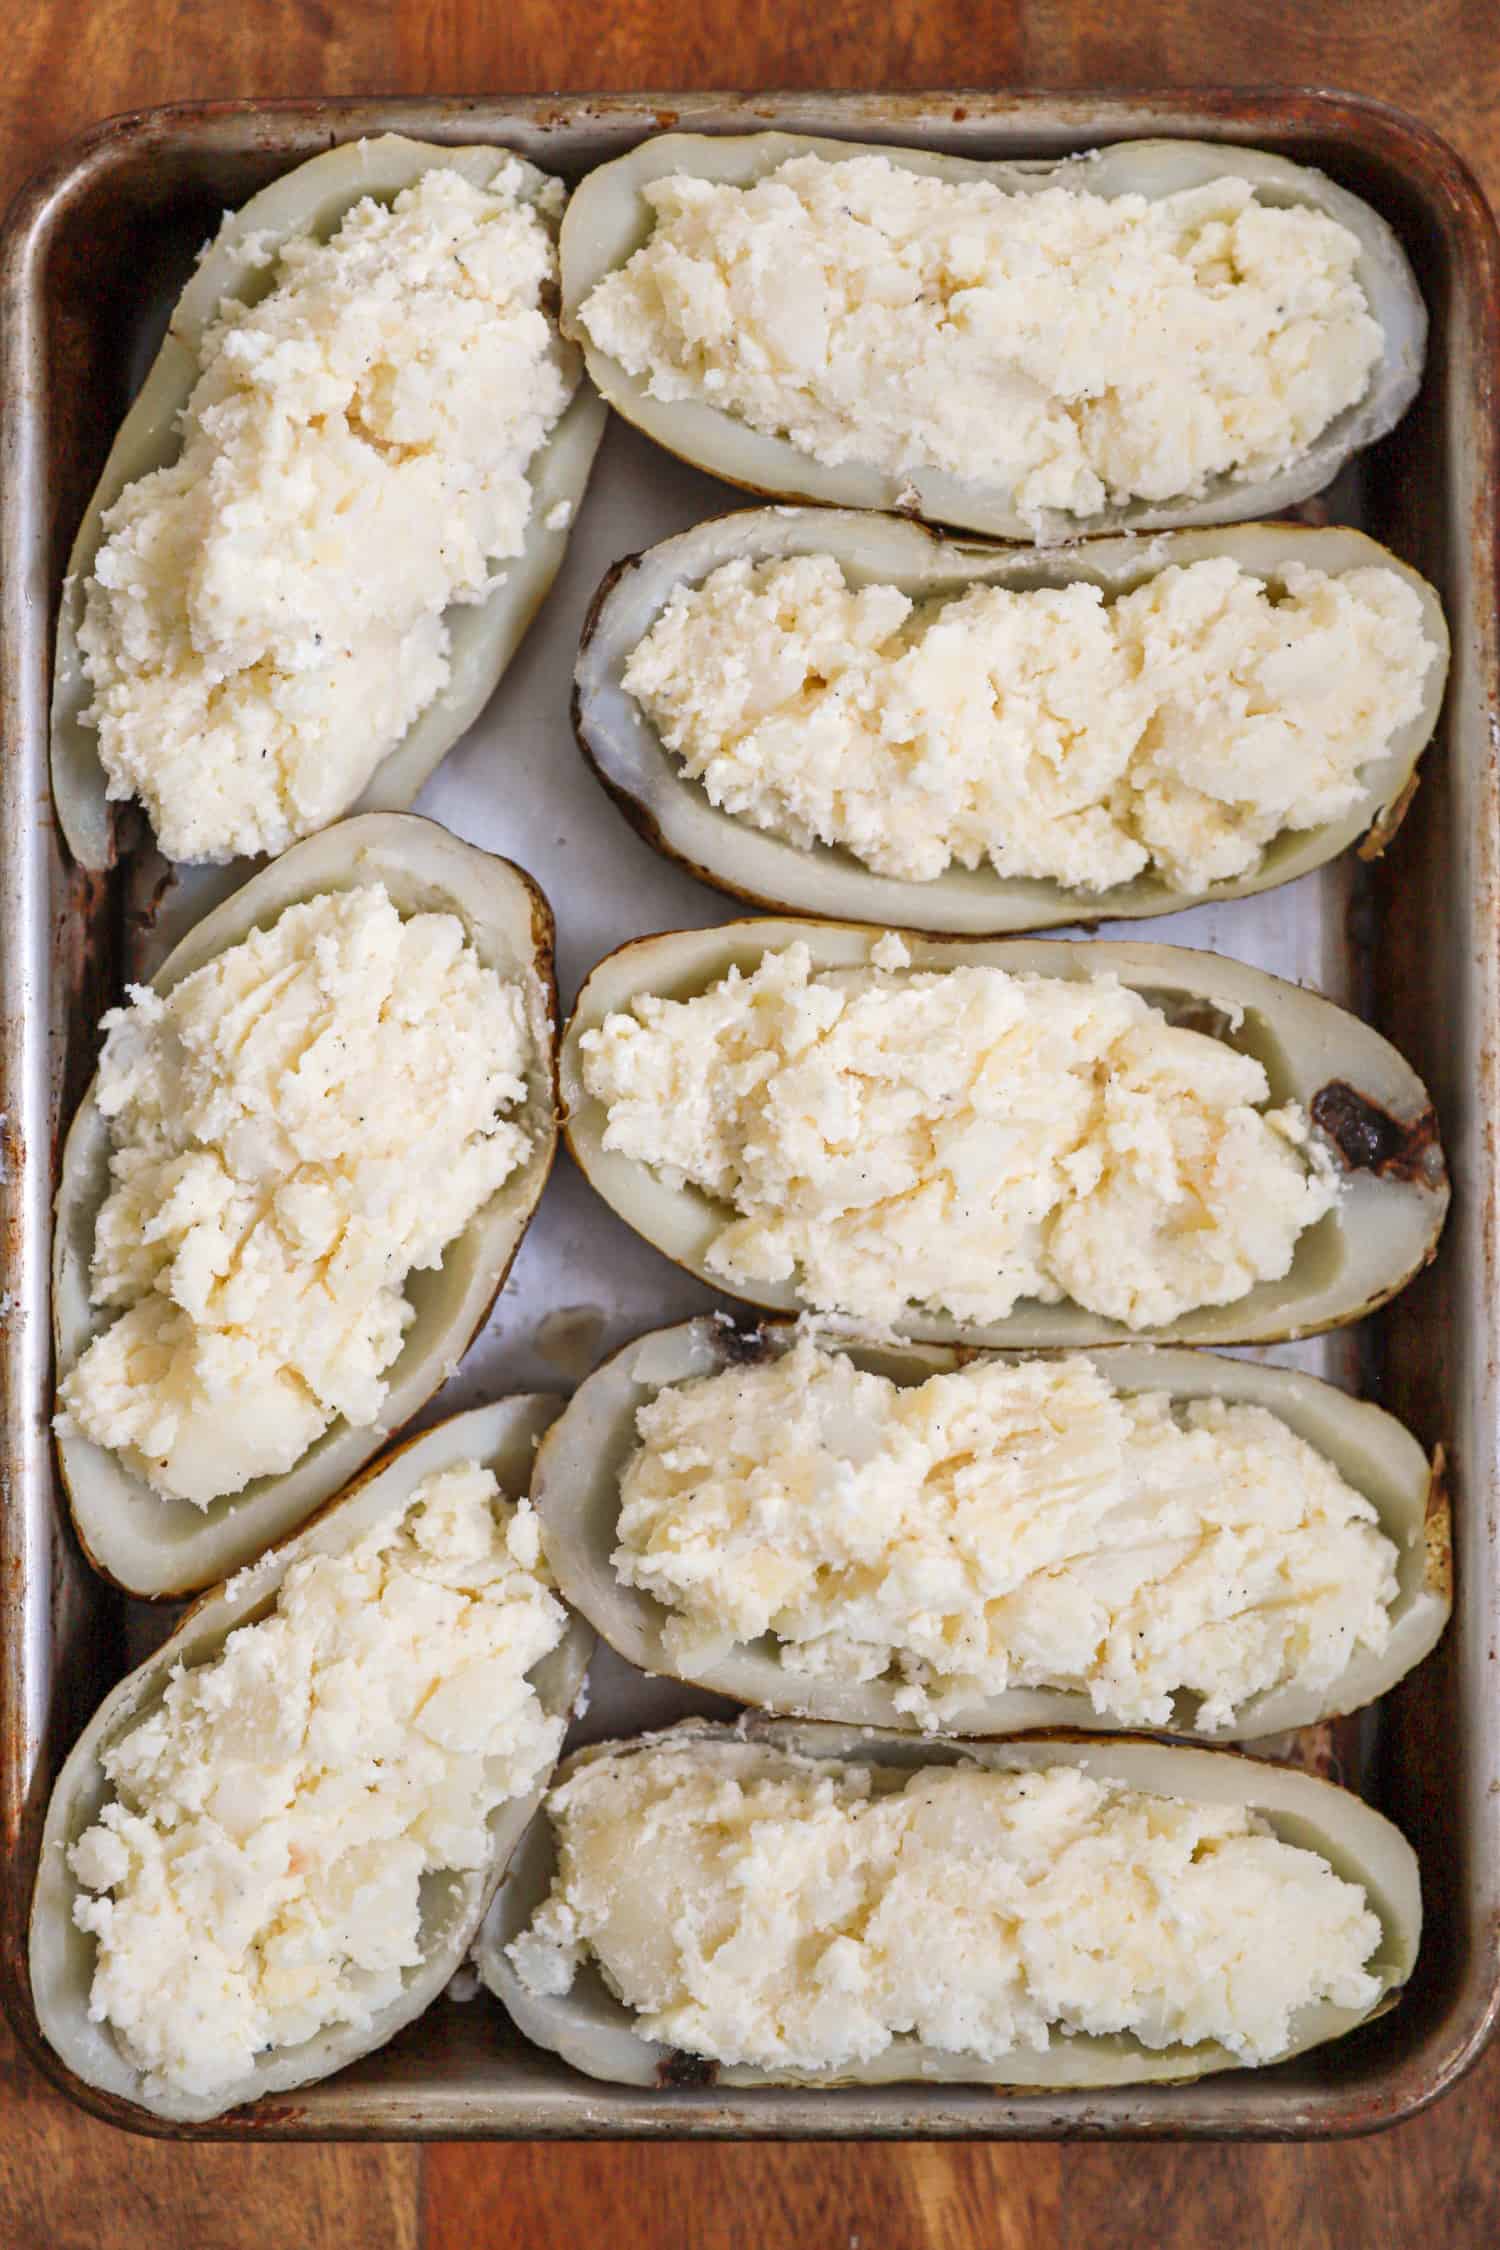 Twice baked potatoes before baking on a silver baking sheet.